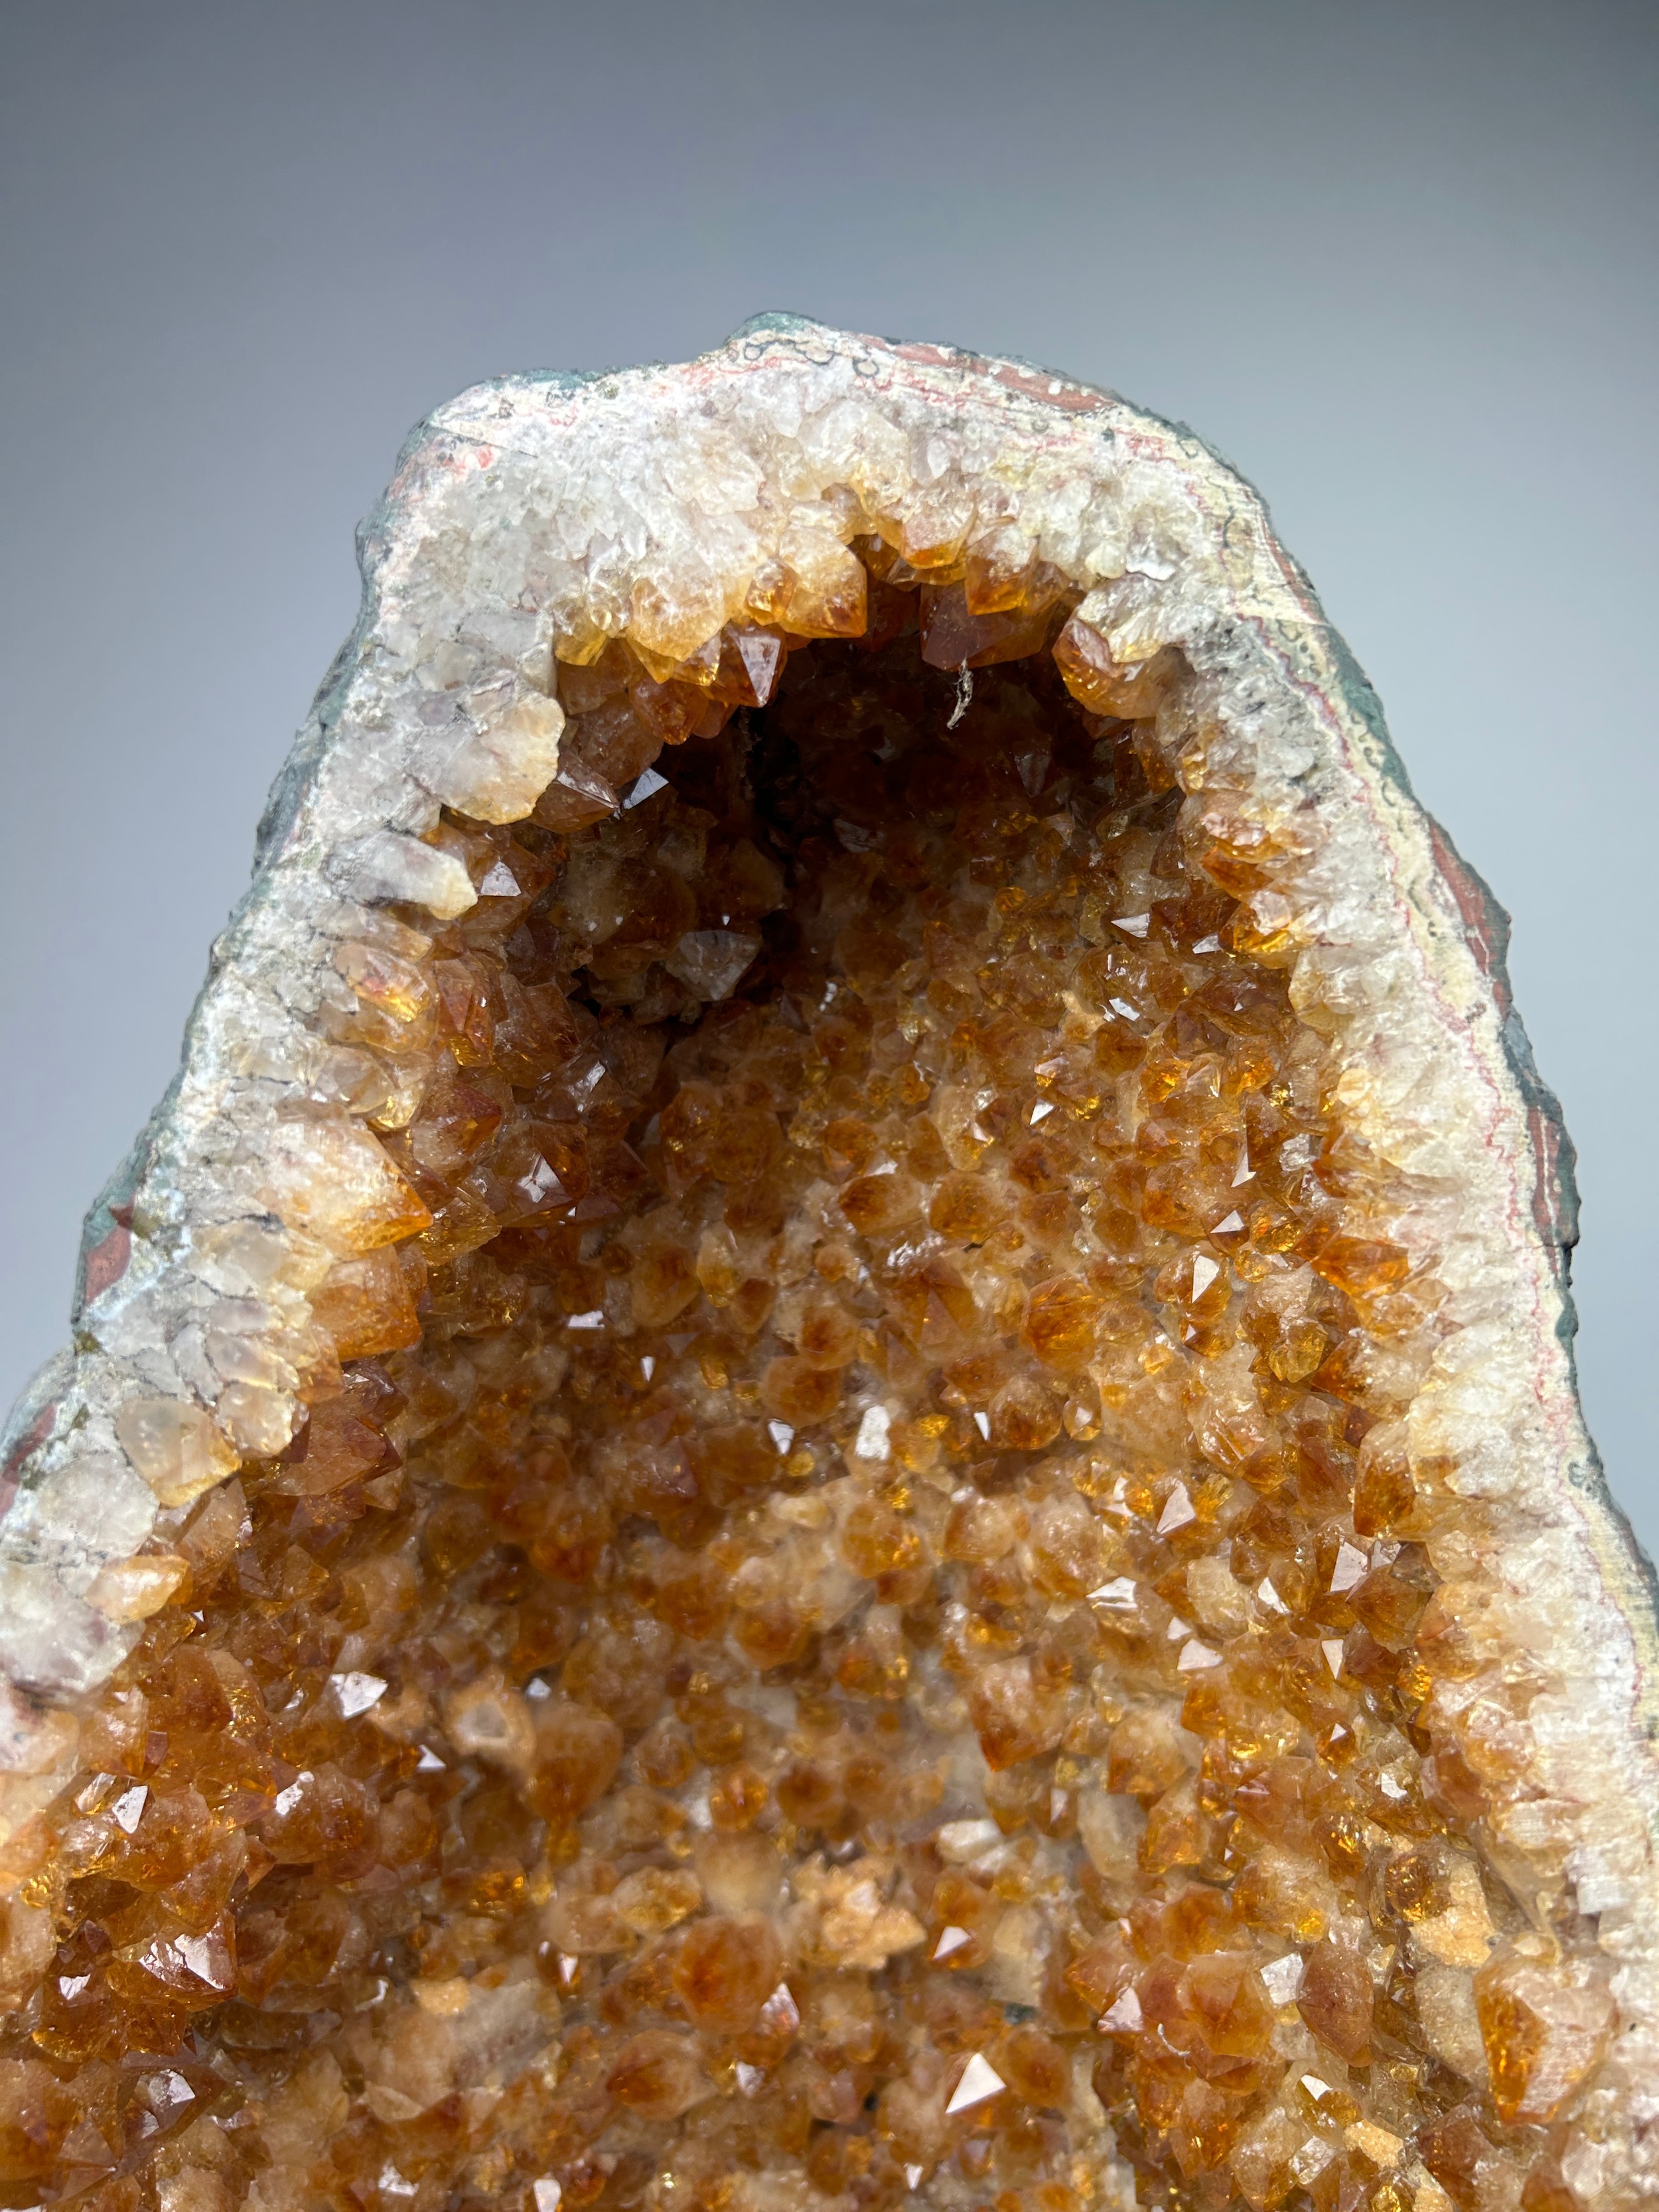 A LARGE CITRINE AMETHYST GEODE 'CATHEDRAL' 59cm x 57cm - Image 2 of 4